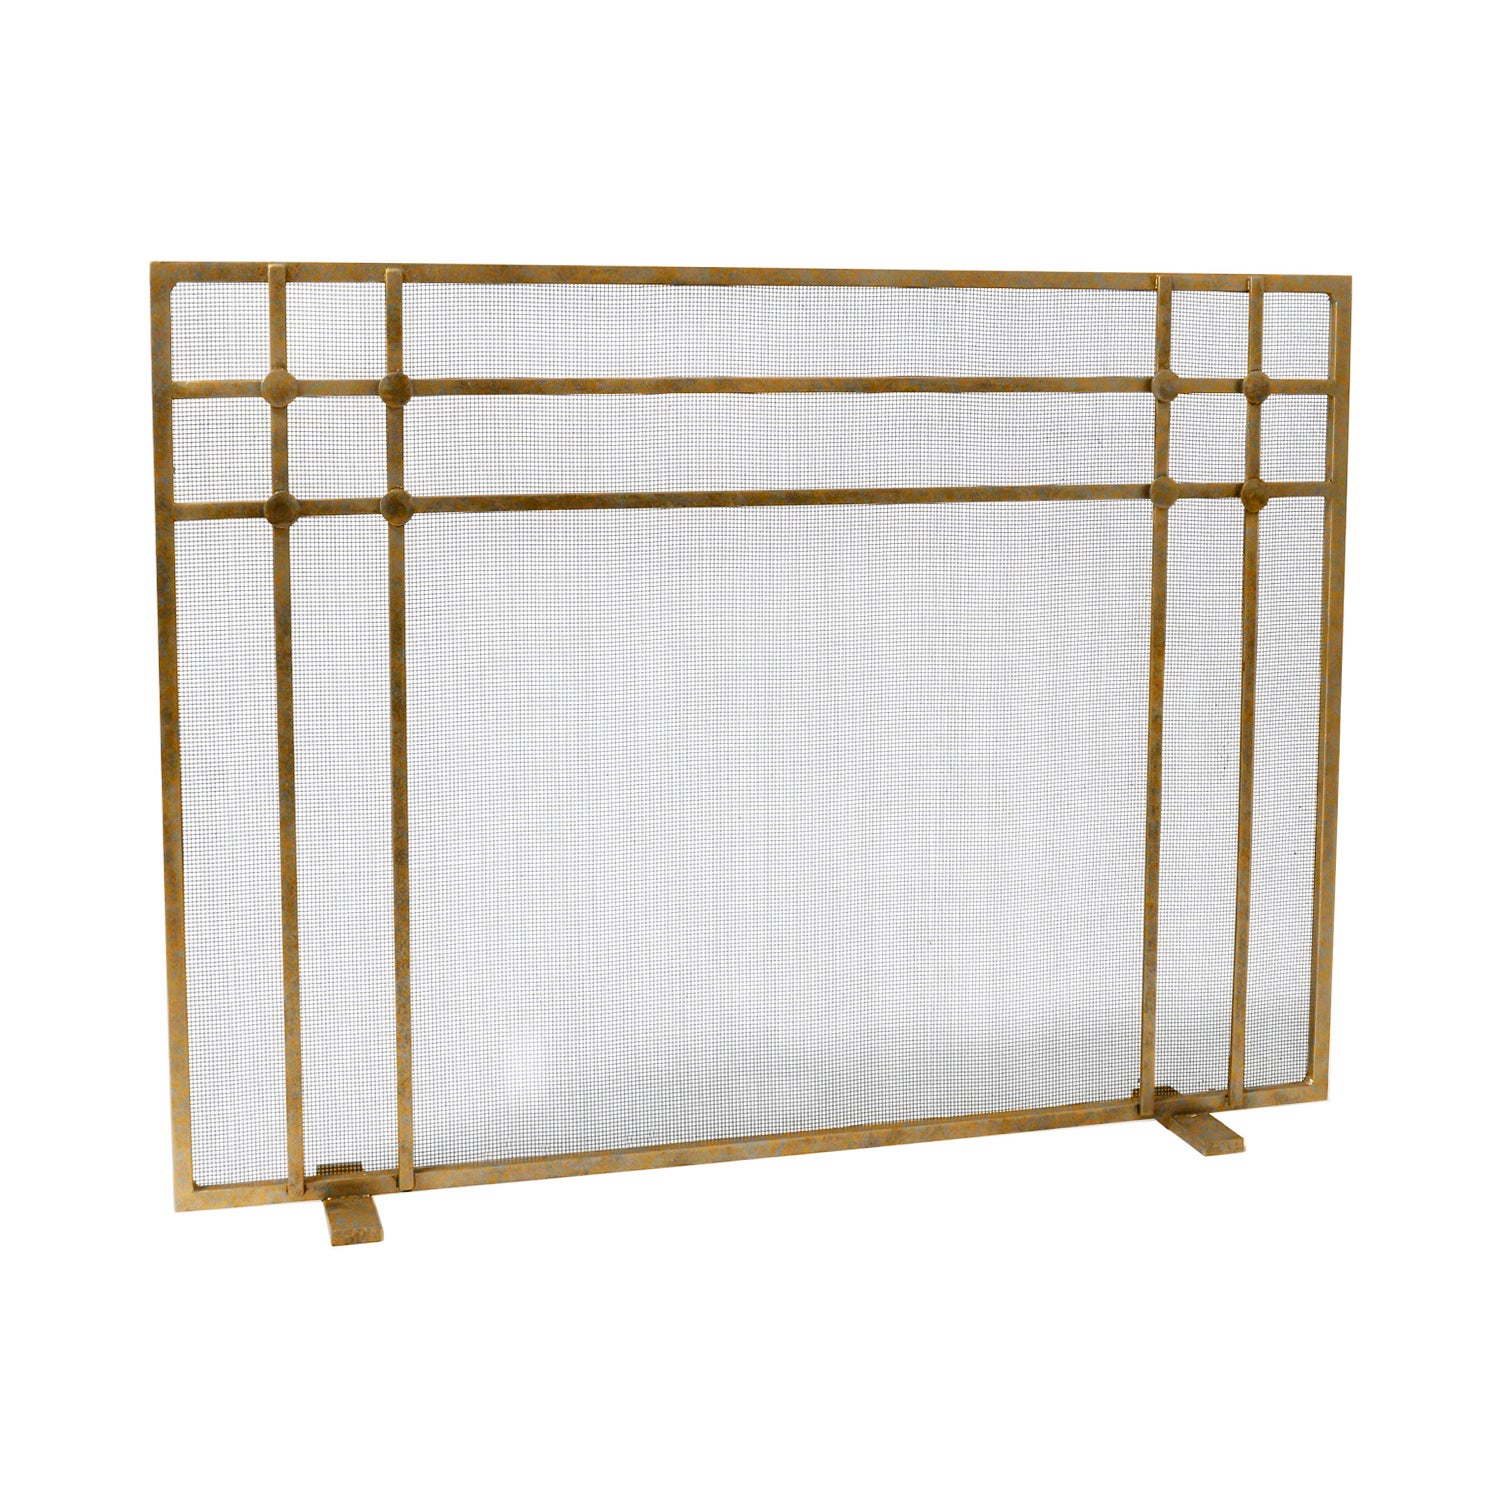 Henry Fireplace Screen in Aged Gold For Sale